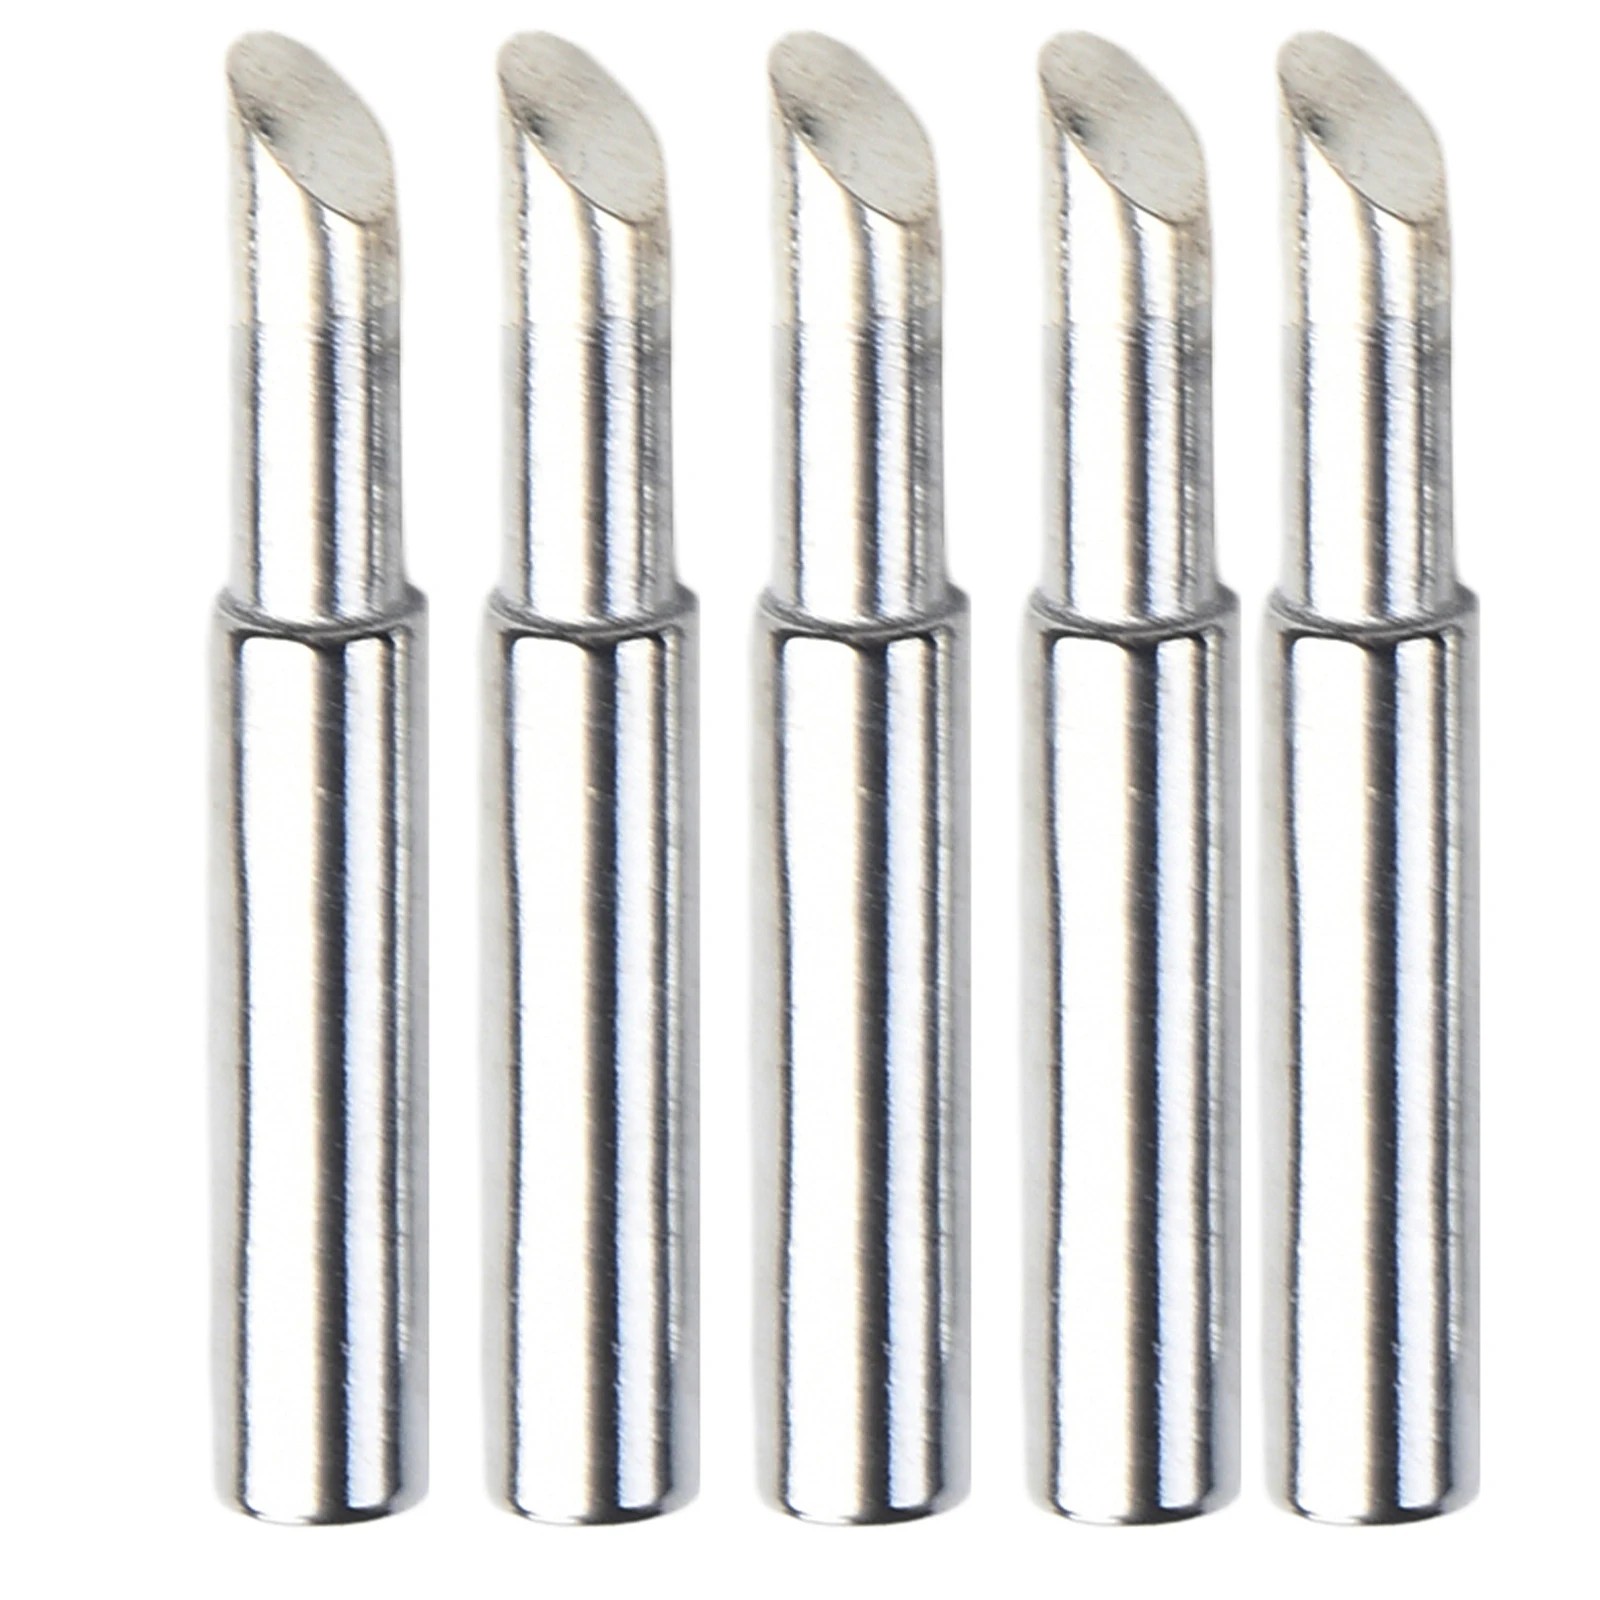 

Soldering Iron Tips Soldering Tools Professional Grade Copper Welding Tips Ideal for Thick Terminals and Circuit Boards